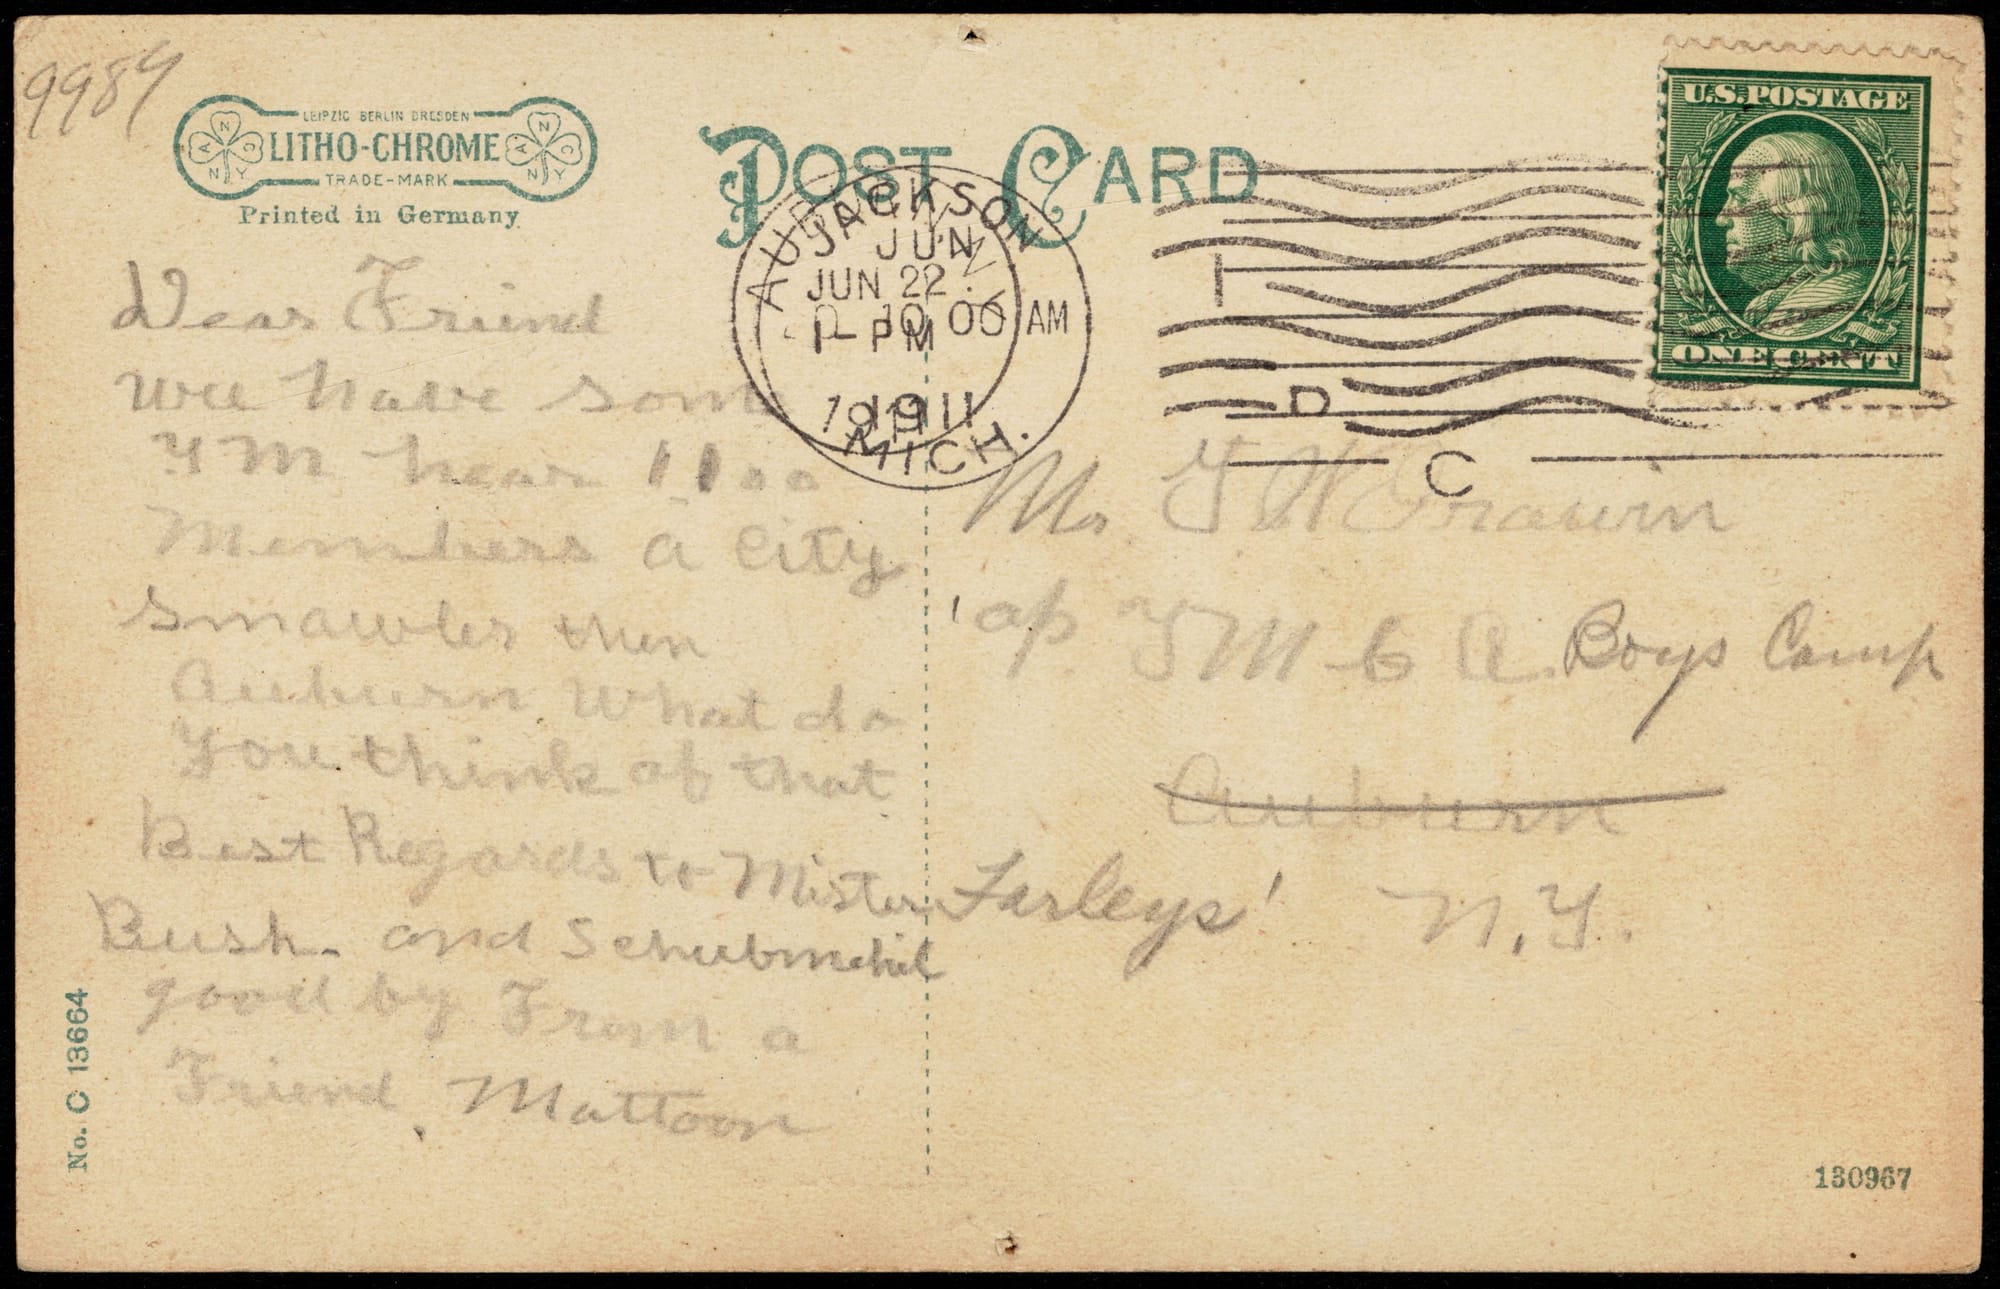 1911 postmarked postcard sent from Jackson to someone in New York State